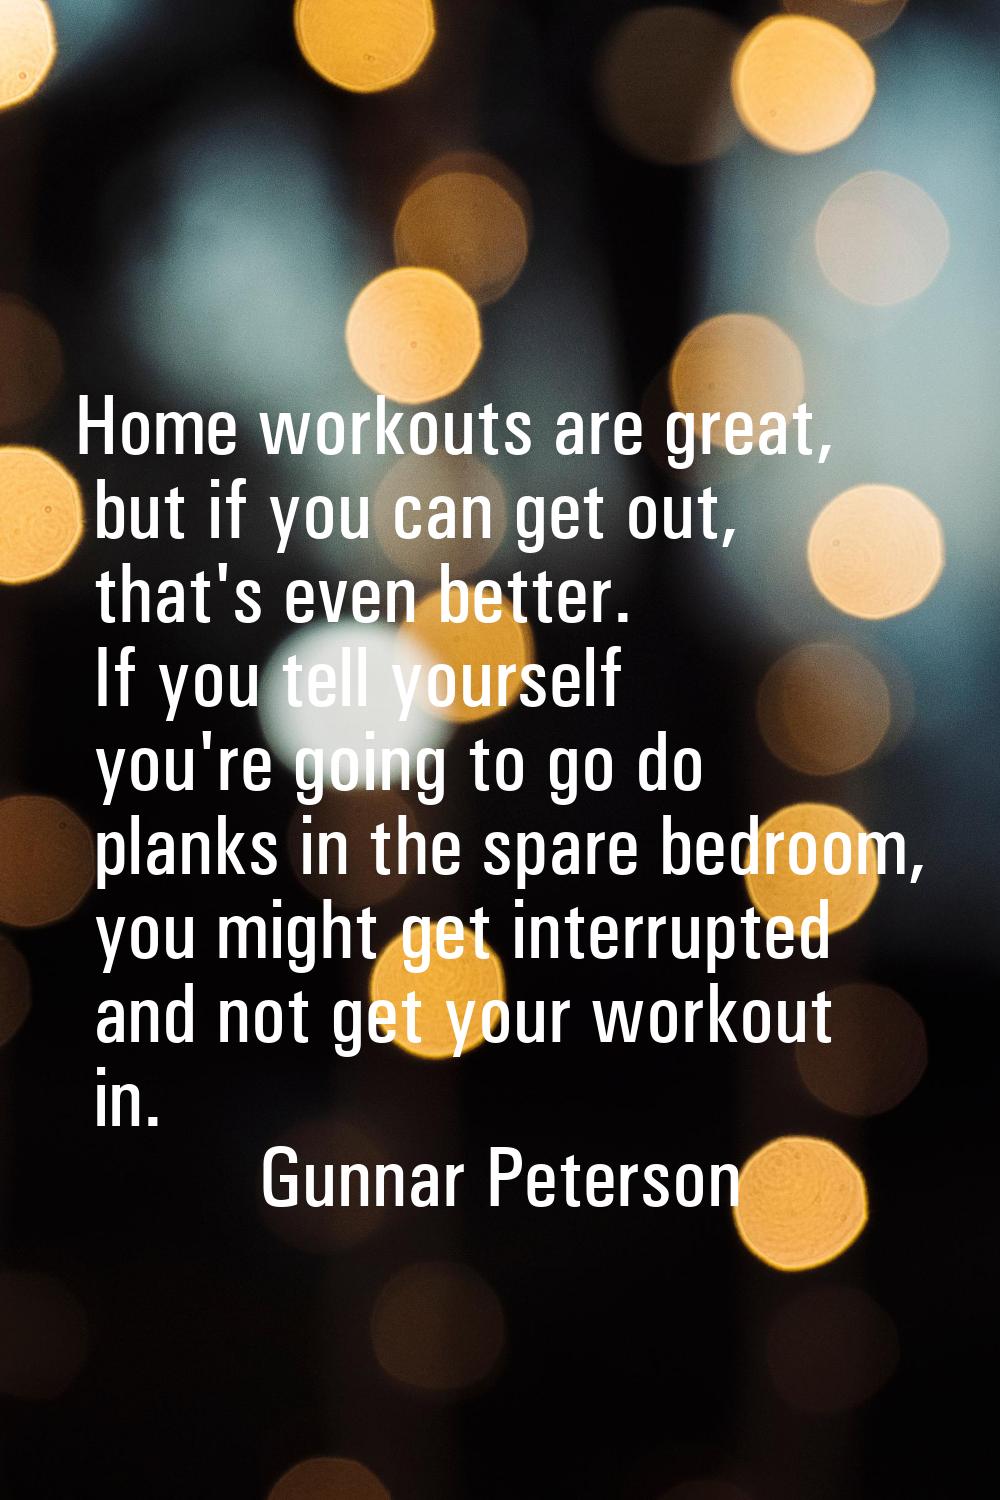 Home workouts are great, but if you can get out, that's even better. If you tell yourself you're go